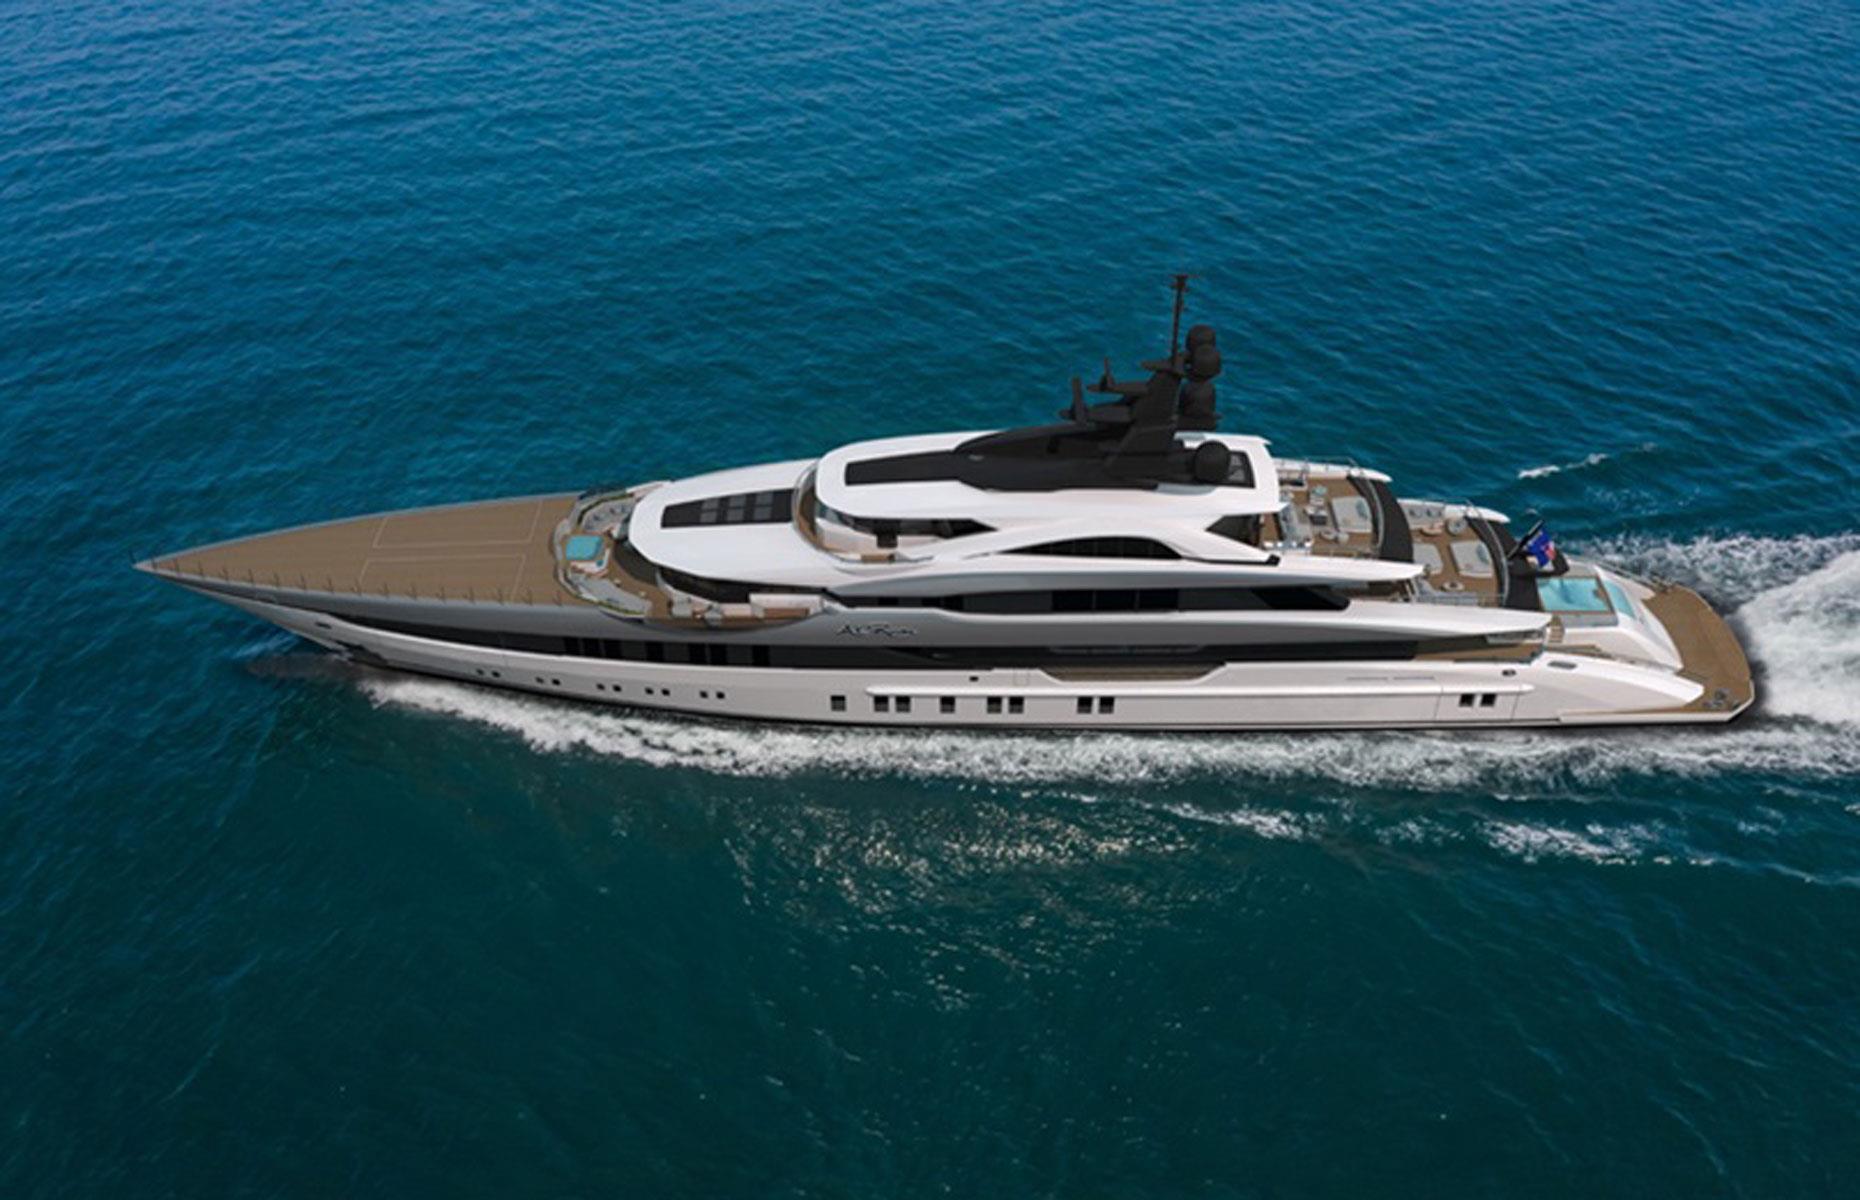 <p>Silent by name, silent by nature: the superyacht was sold to a mystery owner in 2022 and the selling price hasn't been revealed. But it won't have come cheap, that's for sure.</p>  <p>Dreamed up by London's H2 Yacht Design, the modern interiors of the boat whisper quiet luxury. The eight suites (including three VIP cabins) can collectively accommodate up to 12 guests, and there's space for 18 crew members. <em>Al Reem's</em> amenities are top-notch too, with the beach club, gym, and movie theater just some of the standout features.</p>